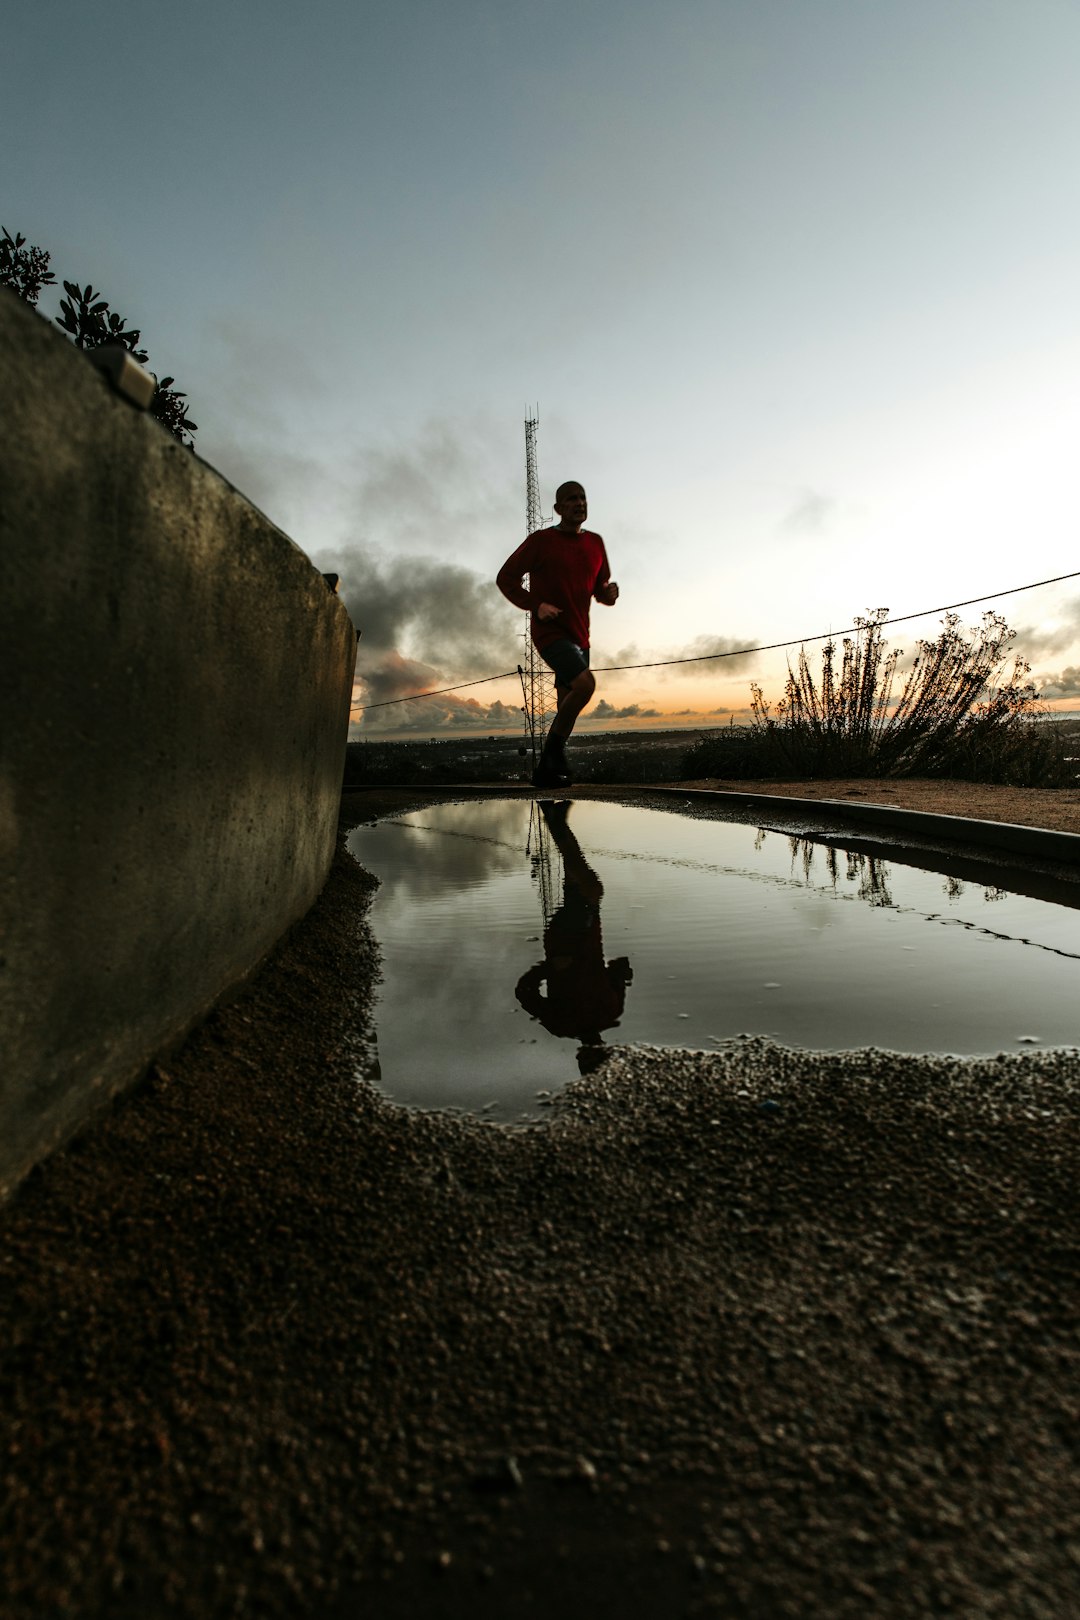 reflection of jogging man on water on road